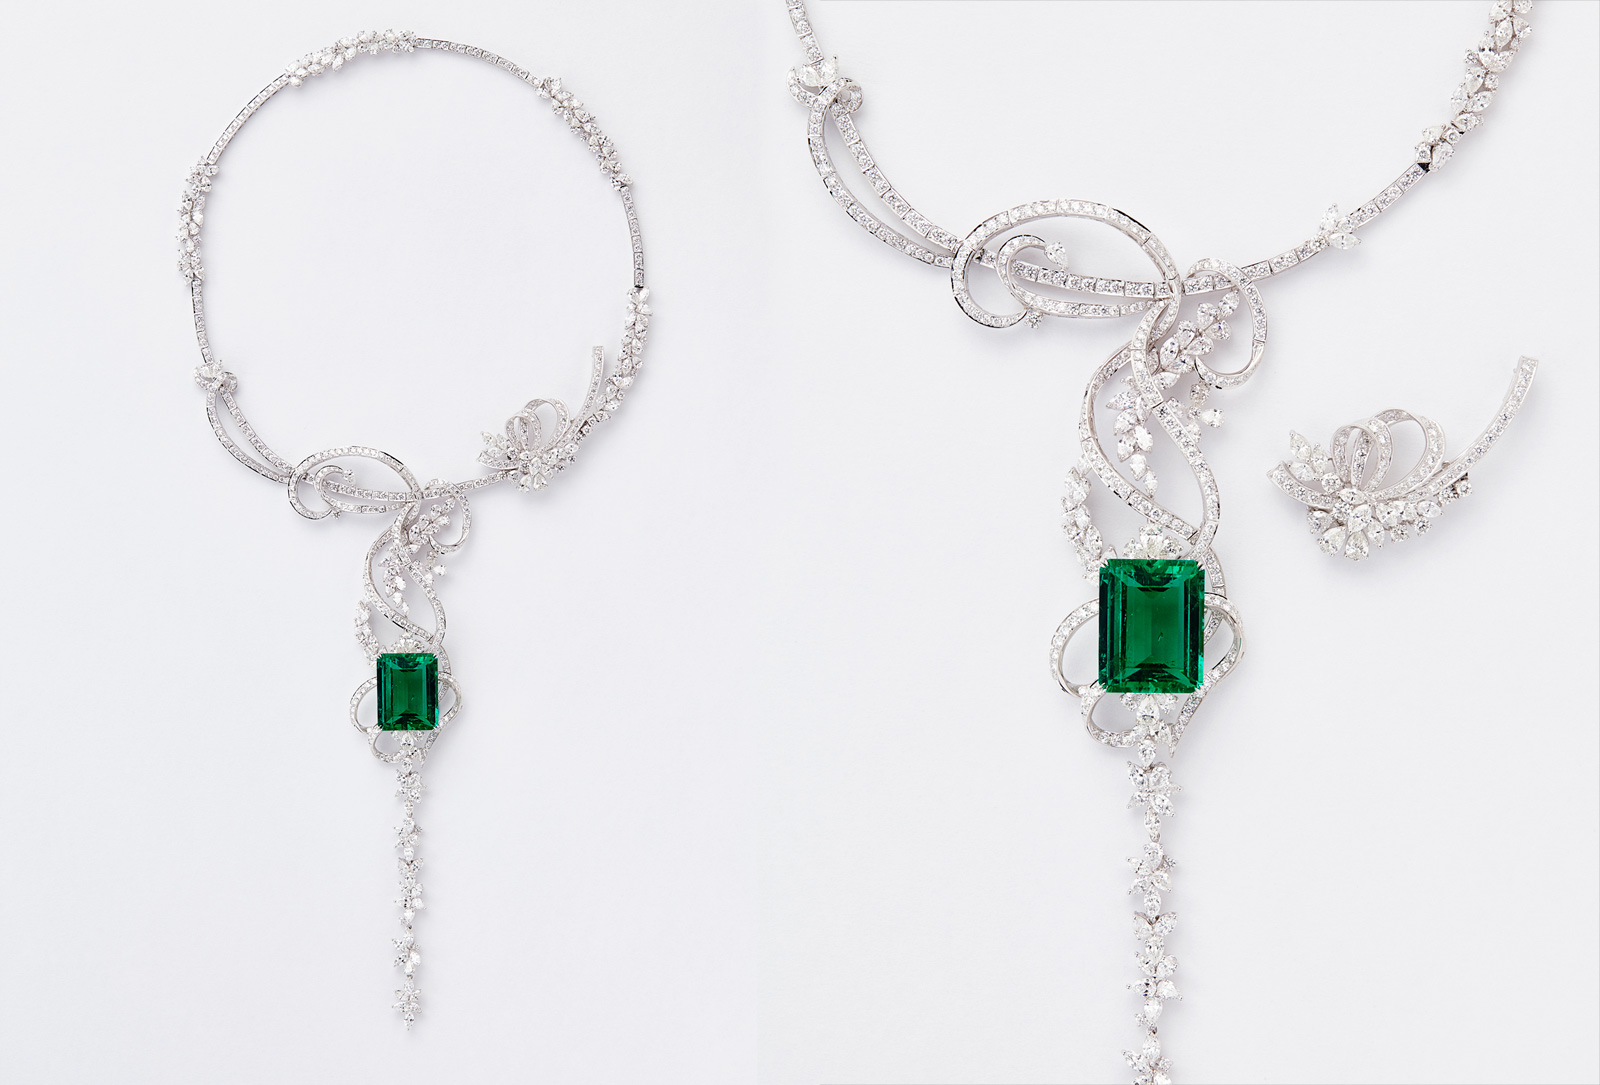 QIU Fine Jewelry master nacklace QIU Fine Jewelry necklace with 33 cts emerald and diamonds from Shanghai/Shanghai 2017 collection